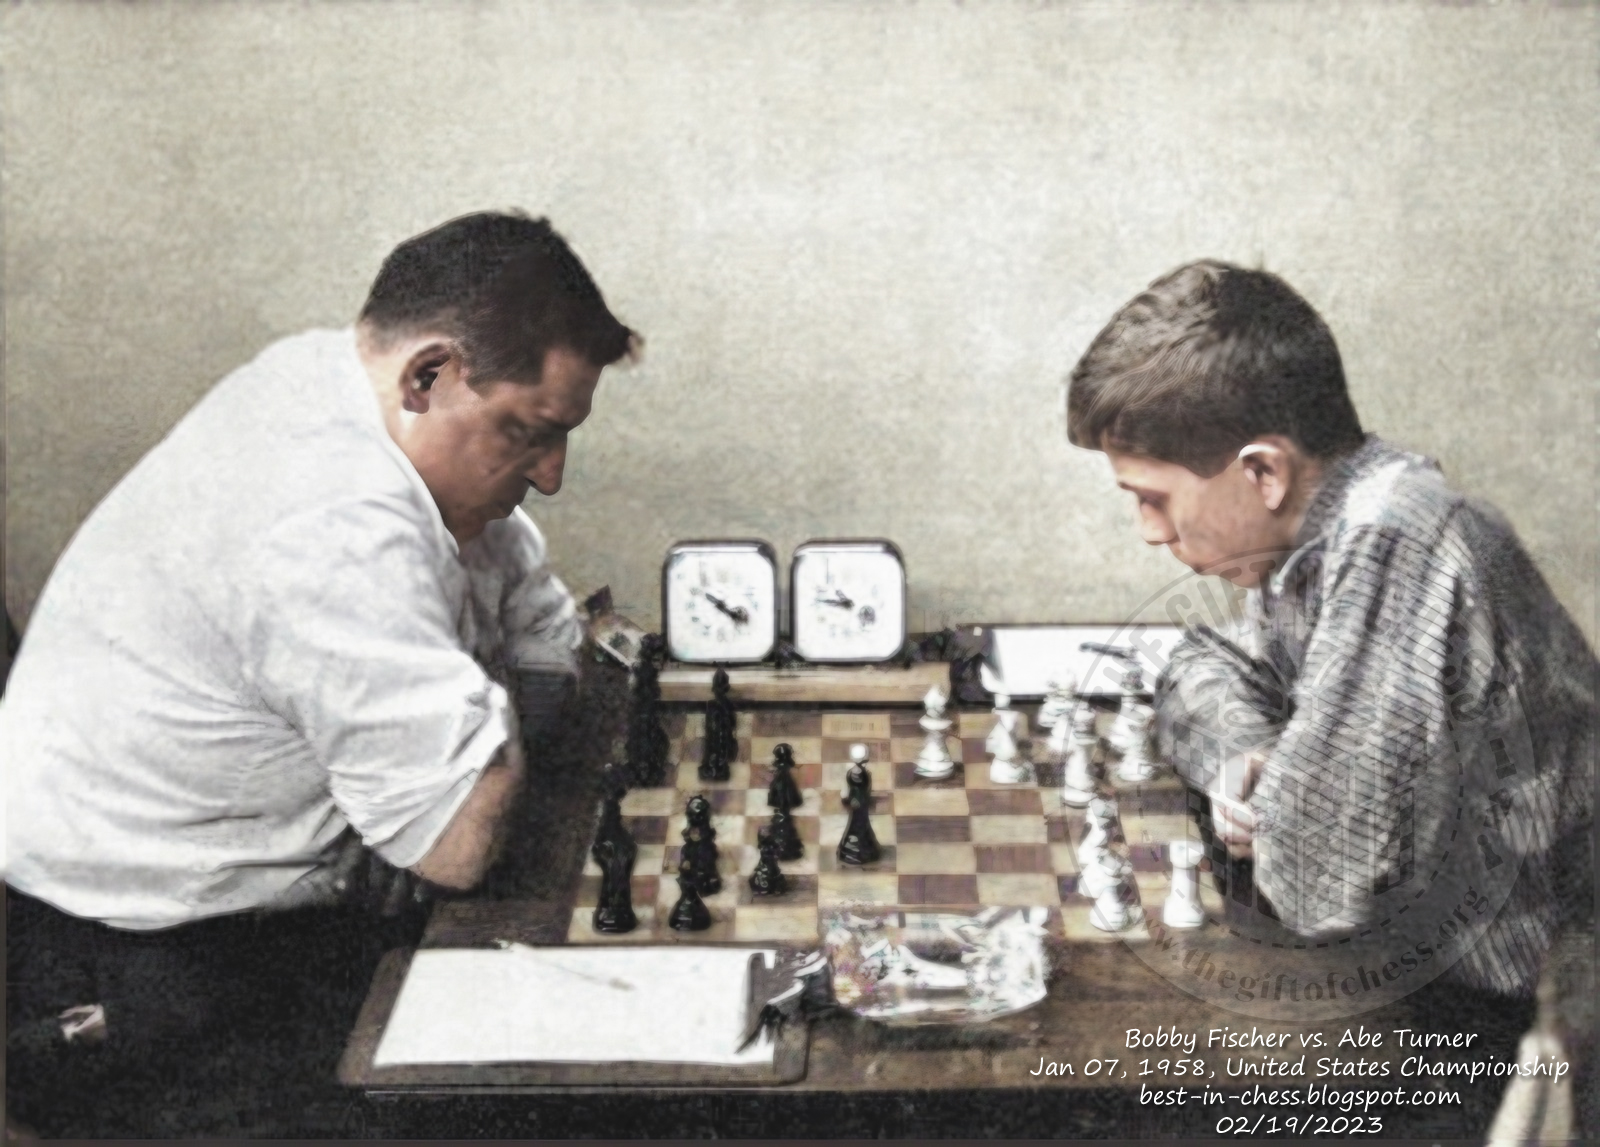 St. Thomas & Prince # 624, World Chess Championships, Imperf Pair